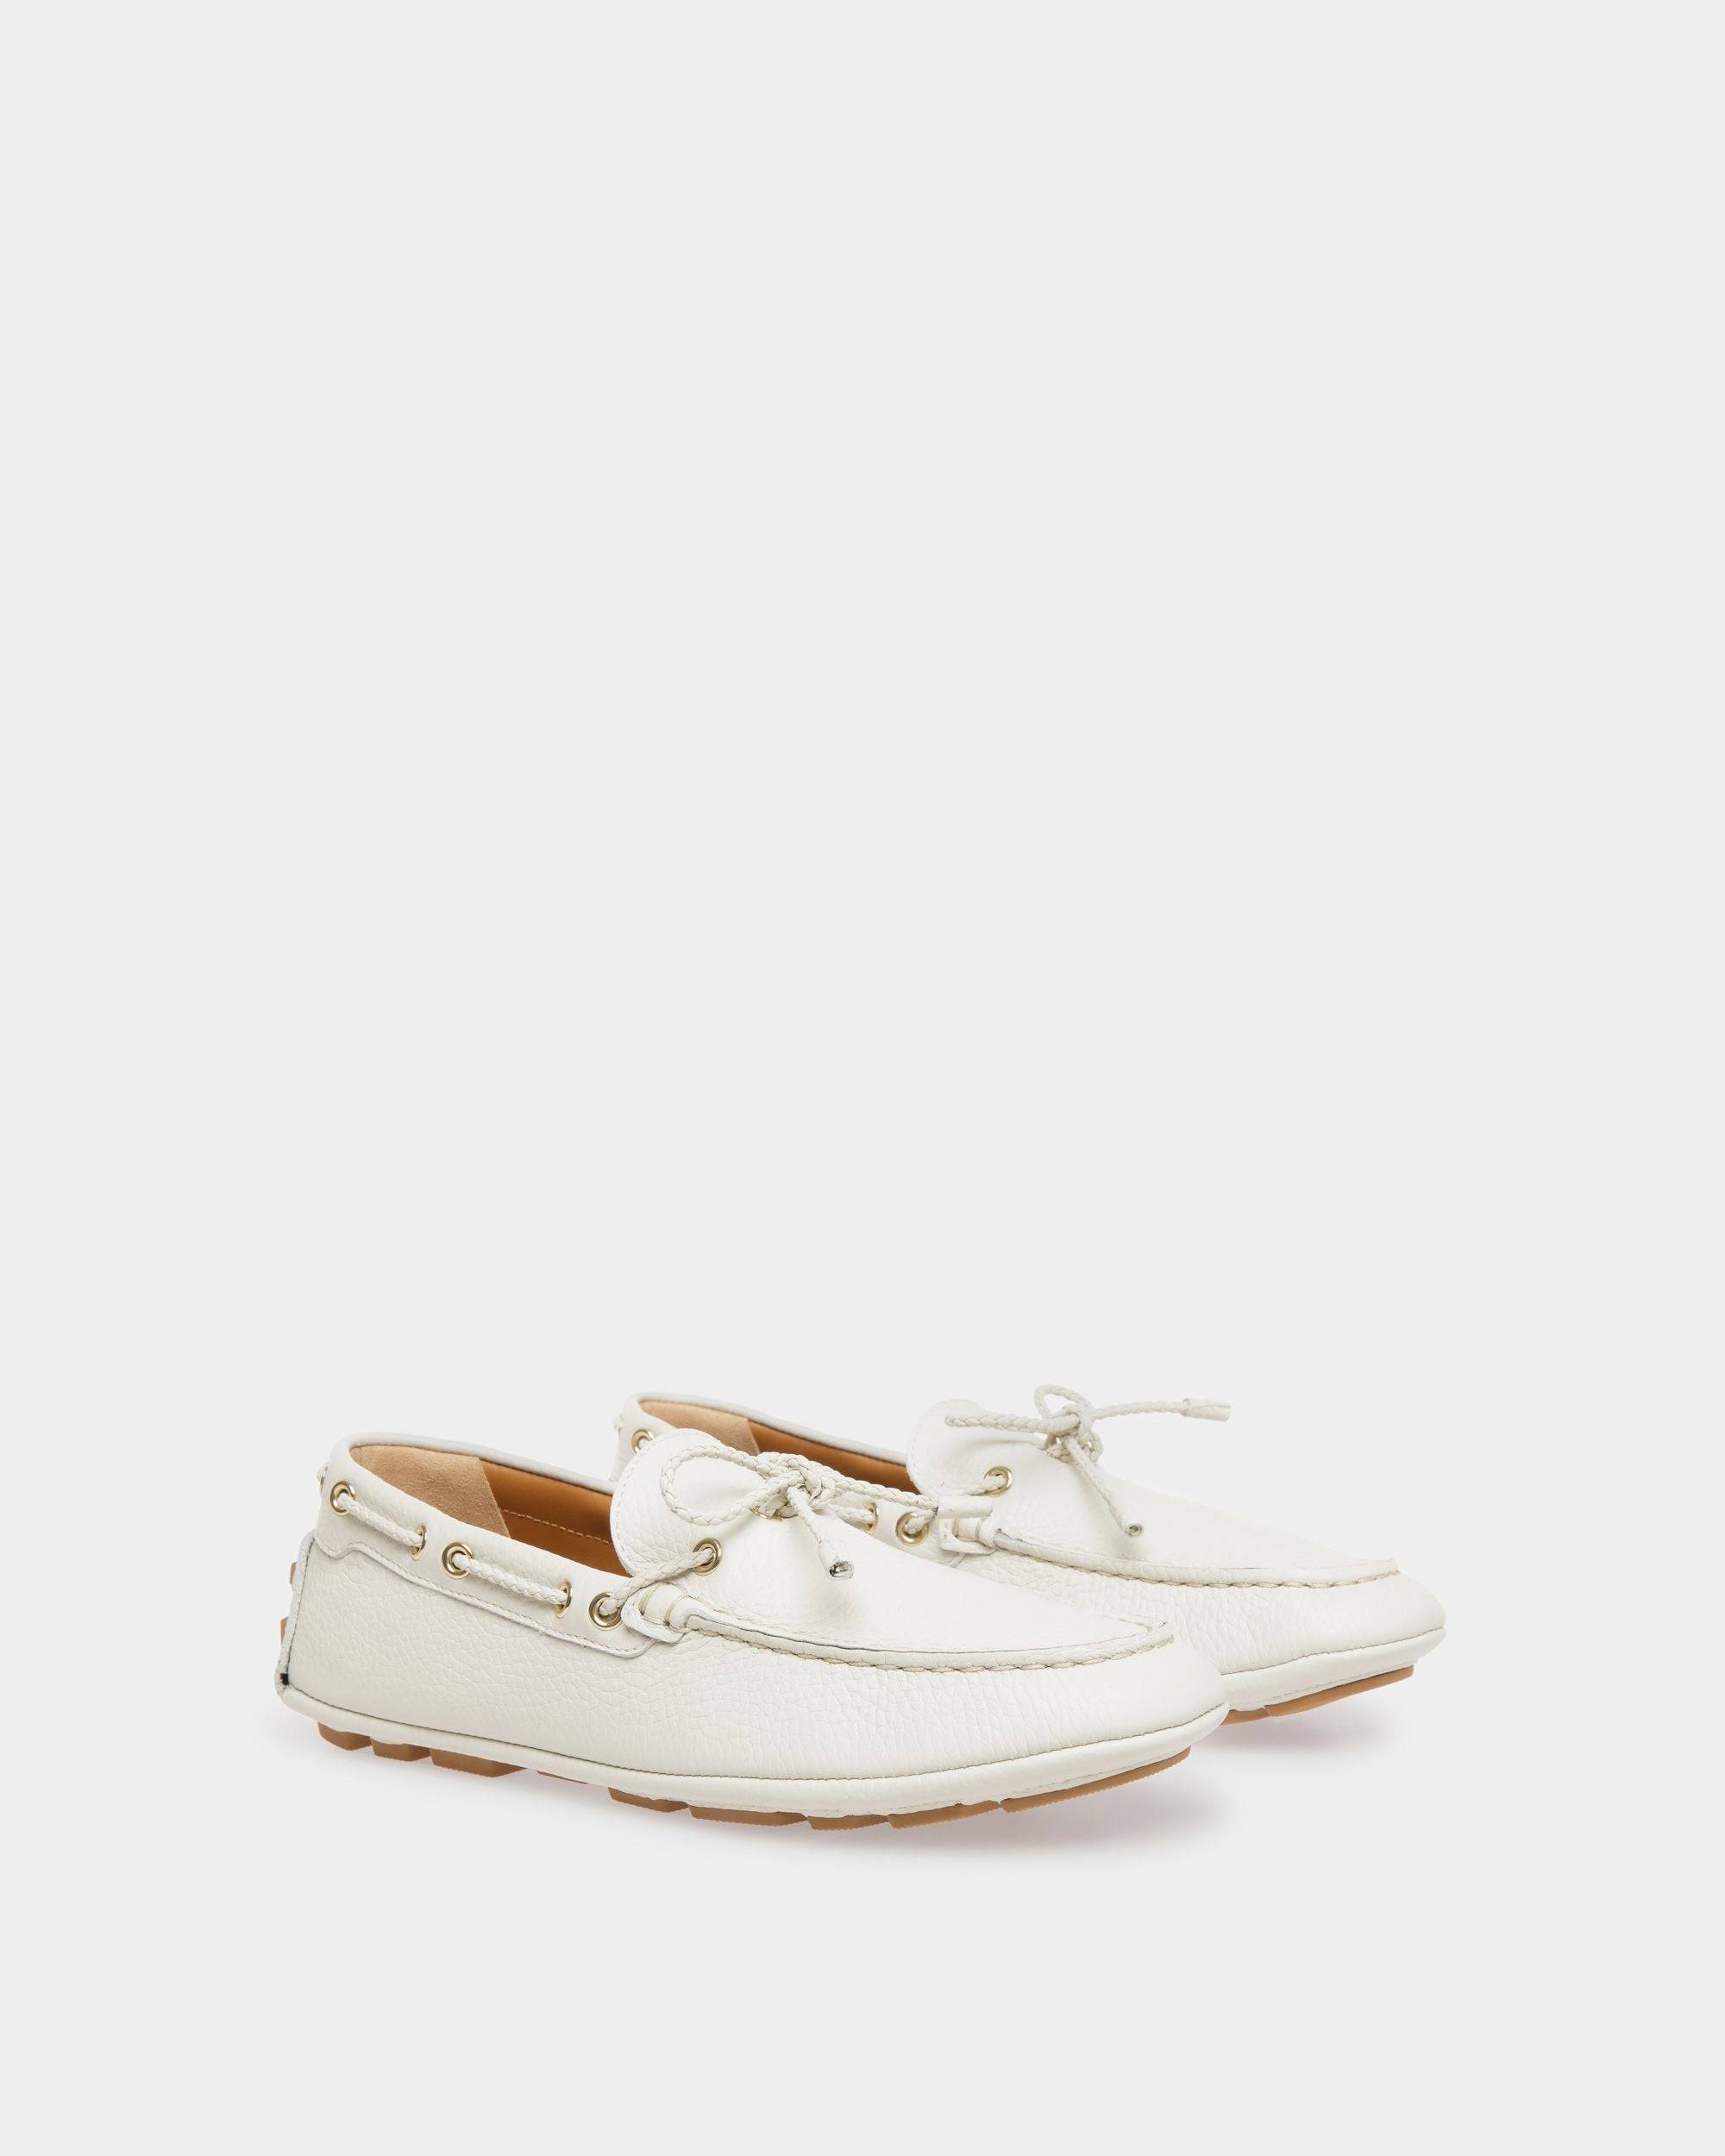 Kyan | Women's Drivers | Dusty White Leather | Bally | Still Life 3/4 Front